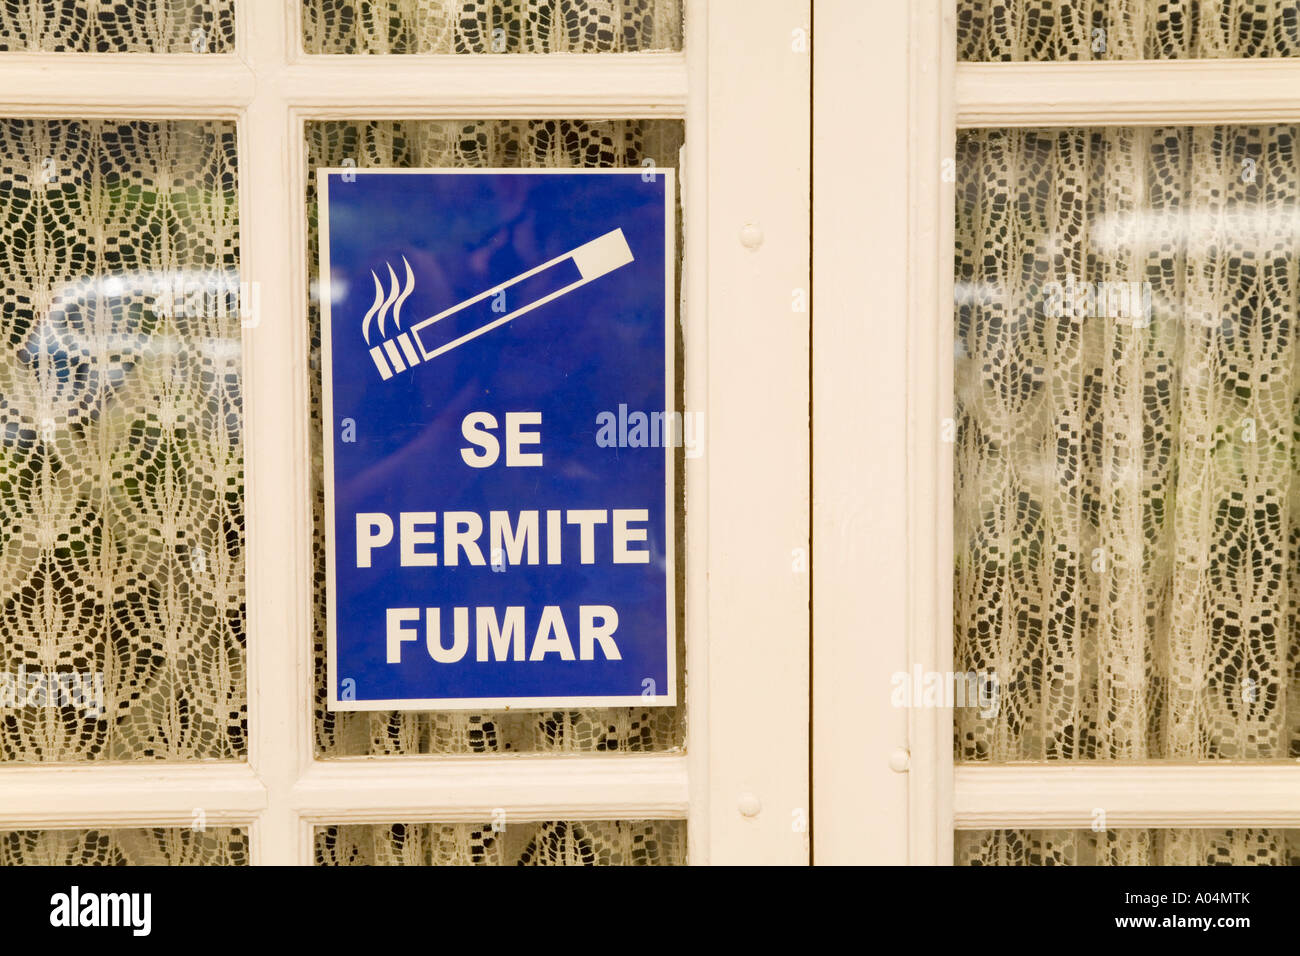 Sign on restaurant door in Spanish language saying Se Permite Fumar or Smoking Permitted Stock Photo